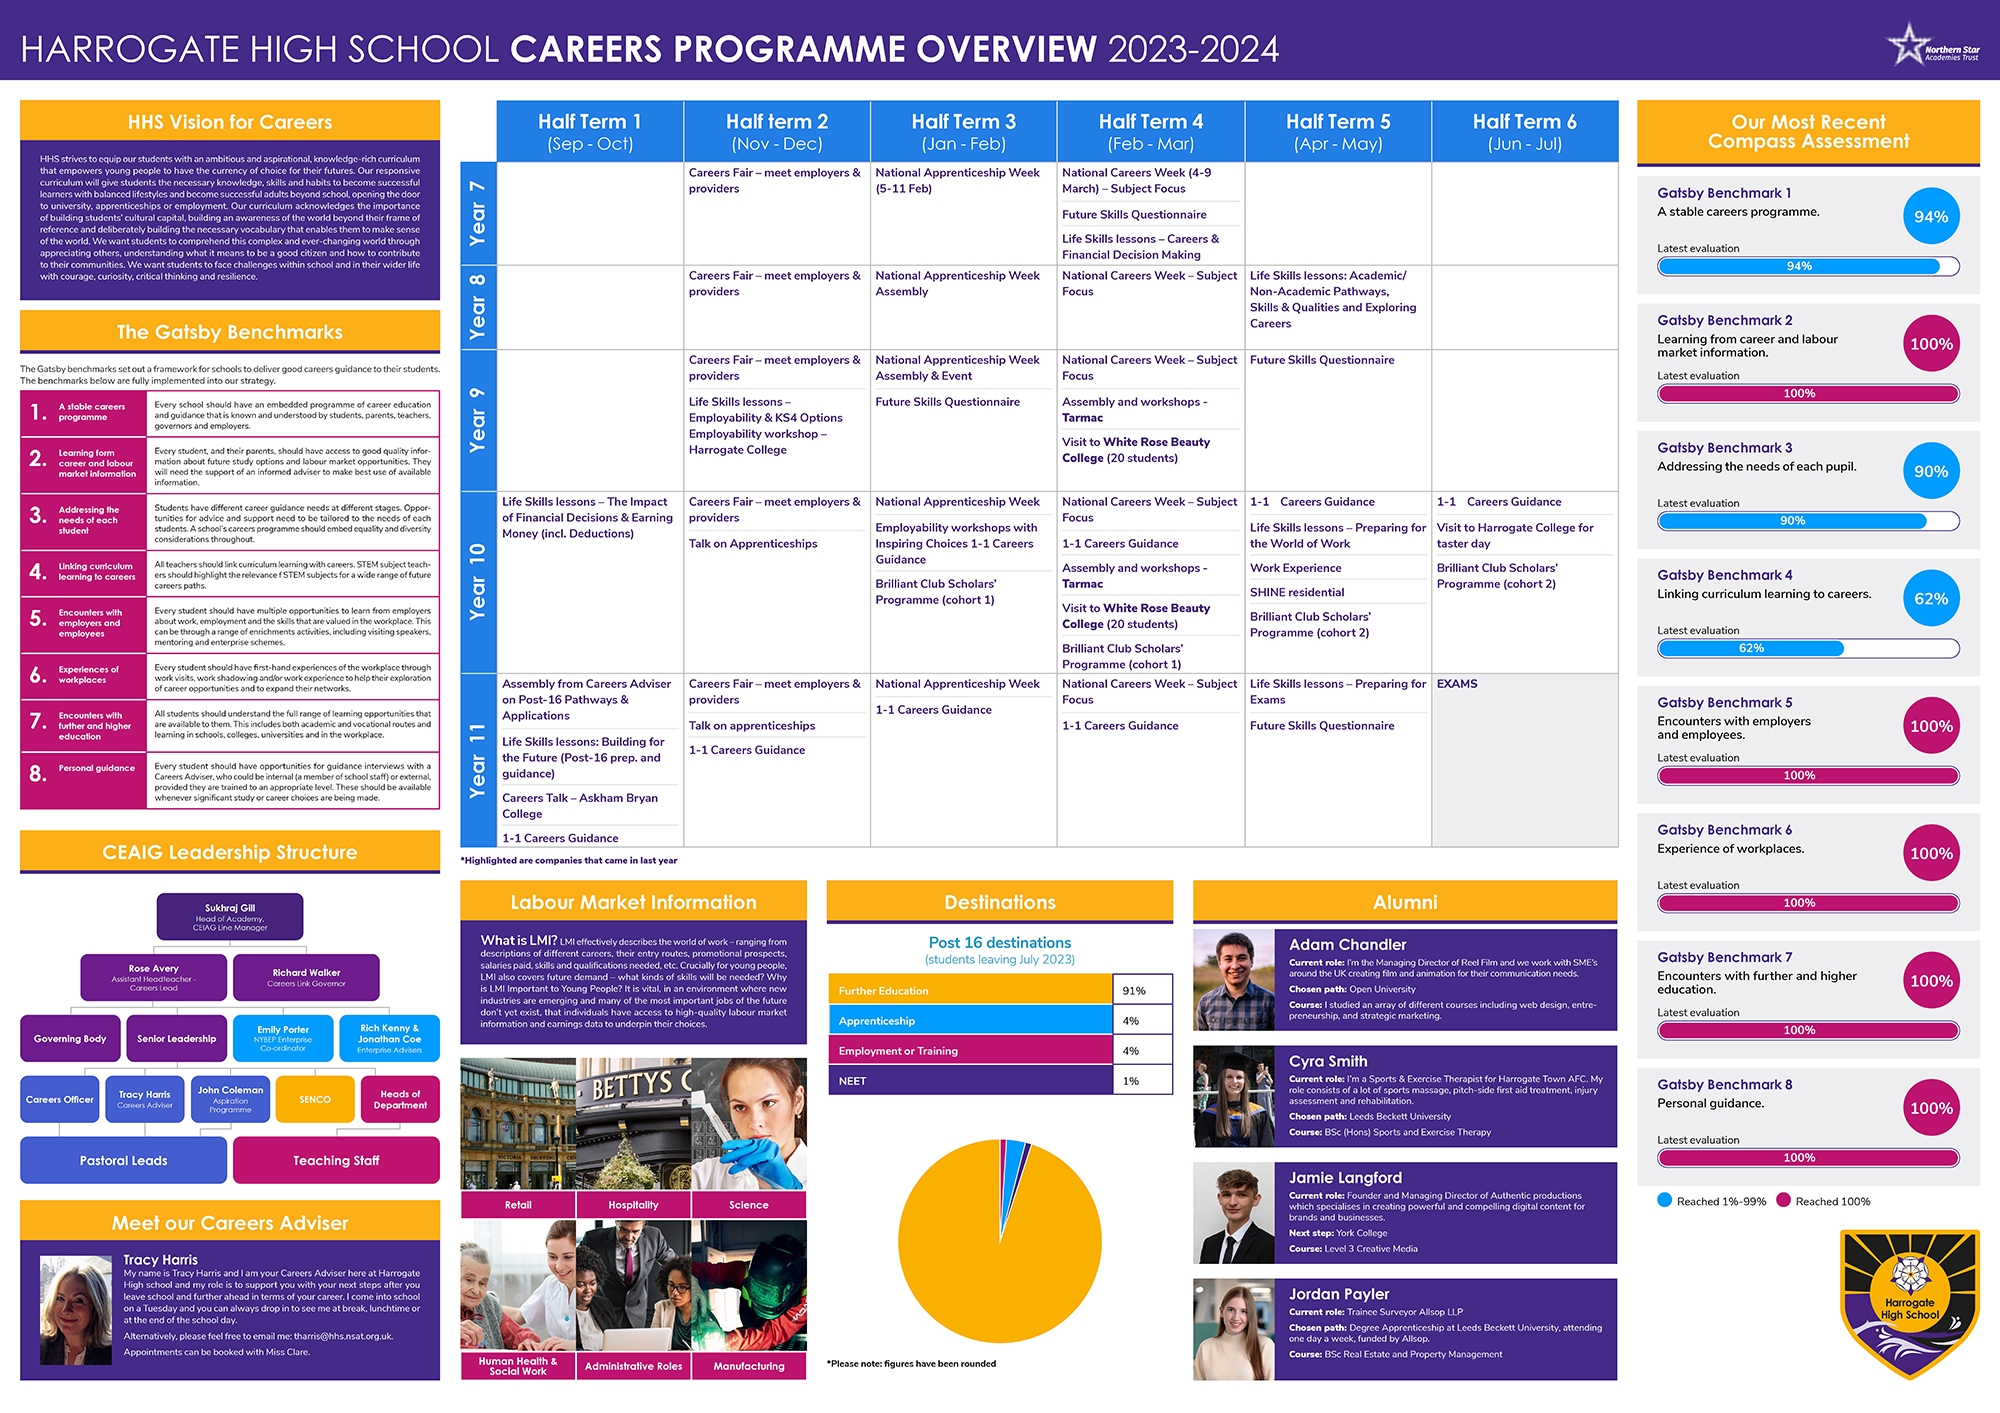 HHS - Careers Programme Overview